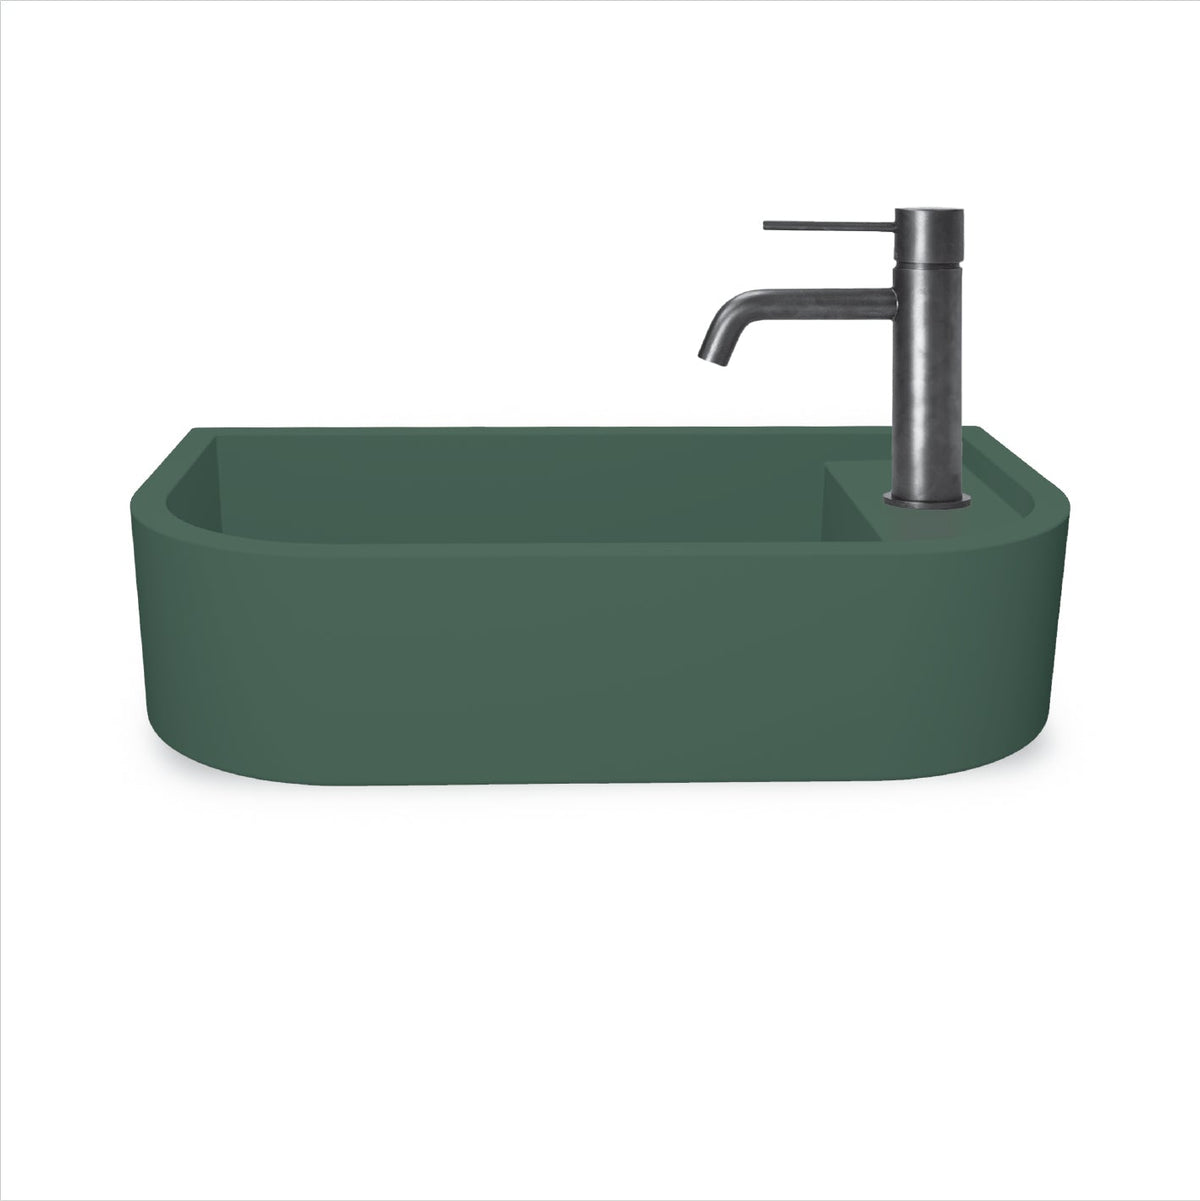 Loop 02 Basin - Overflow - Wall Hung (Teal,Tap Hole,Brass)